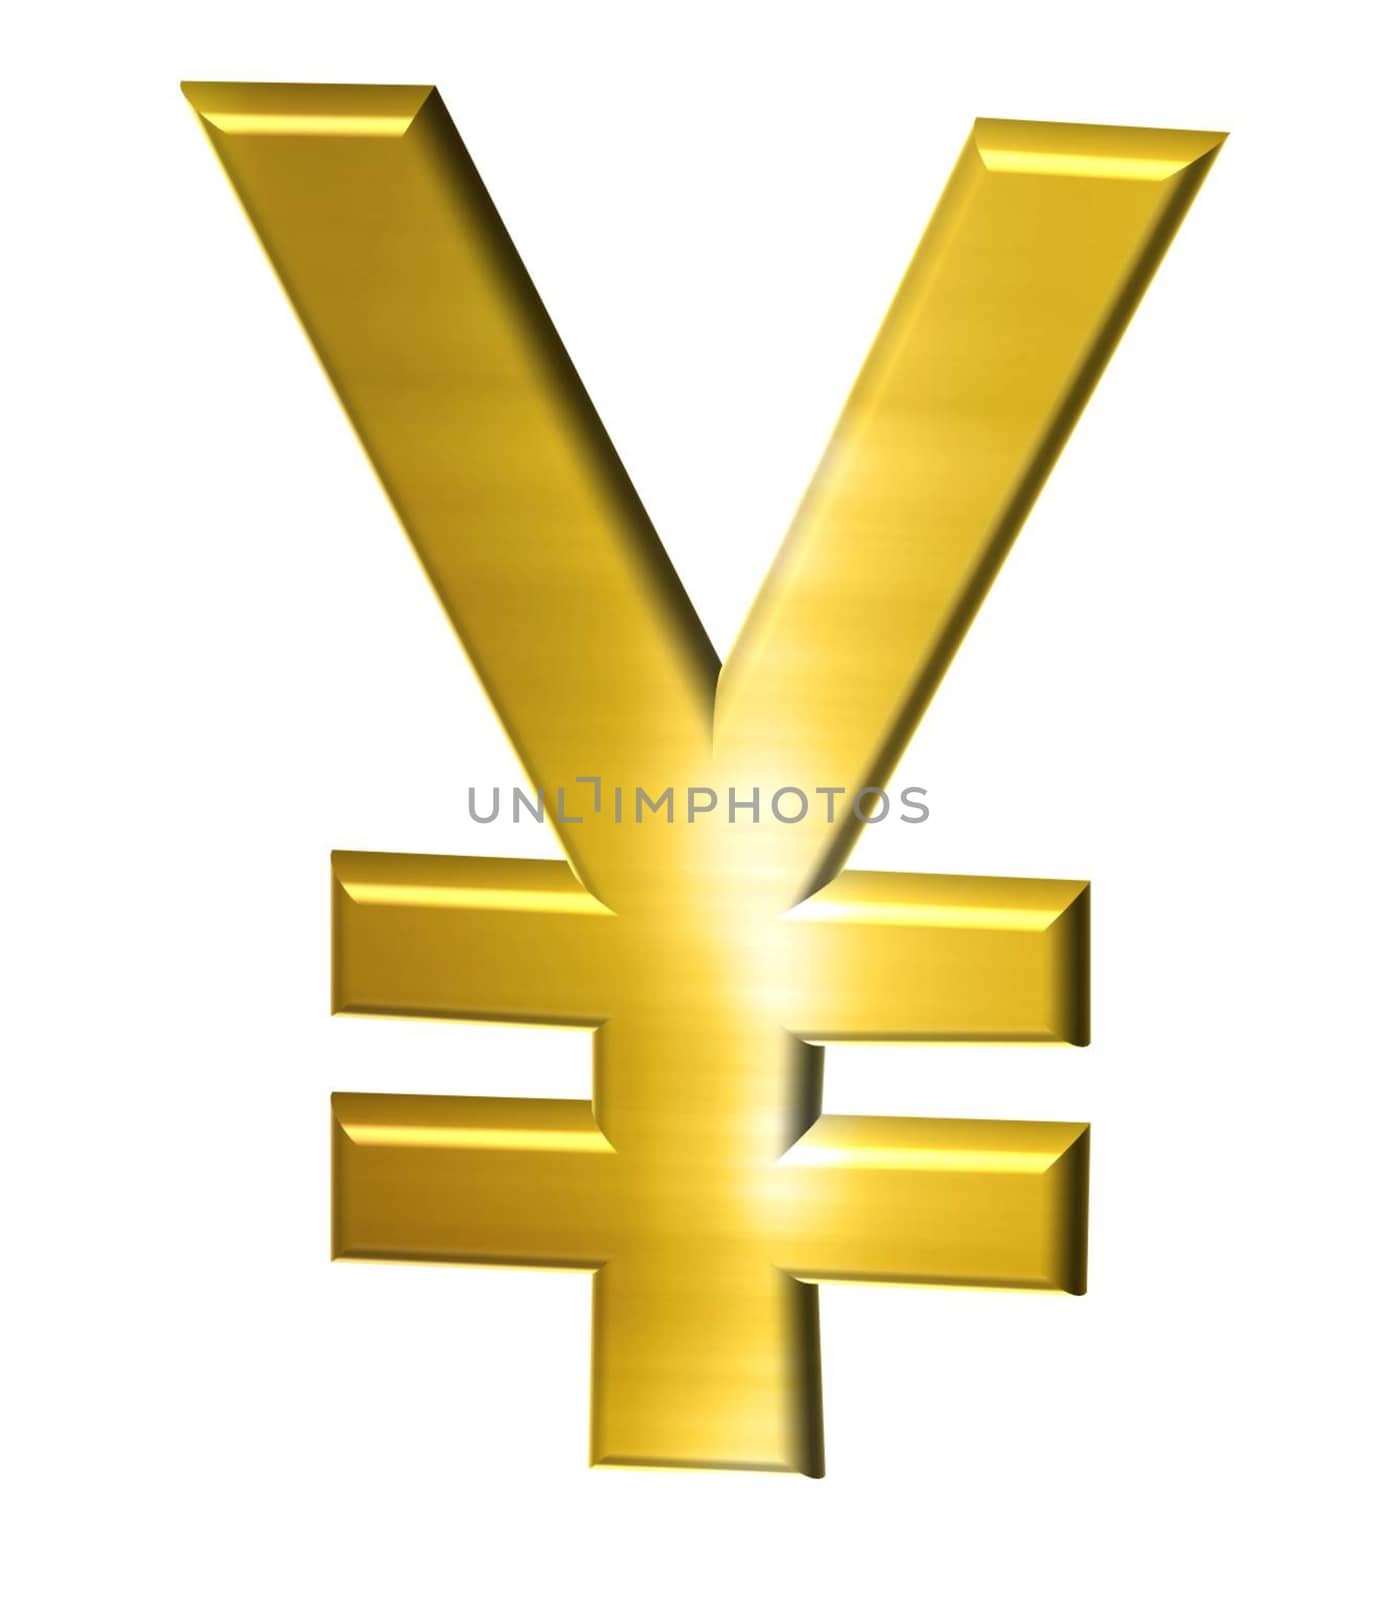 The letter designation of the currency of China - yuan